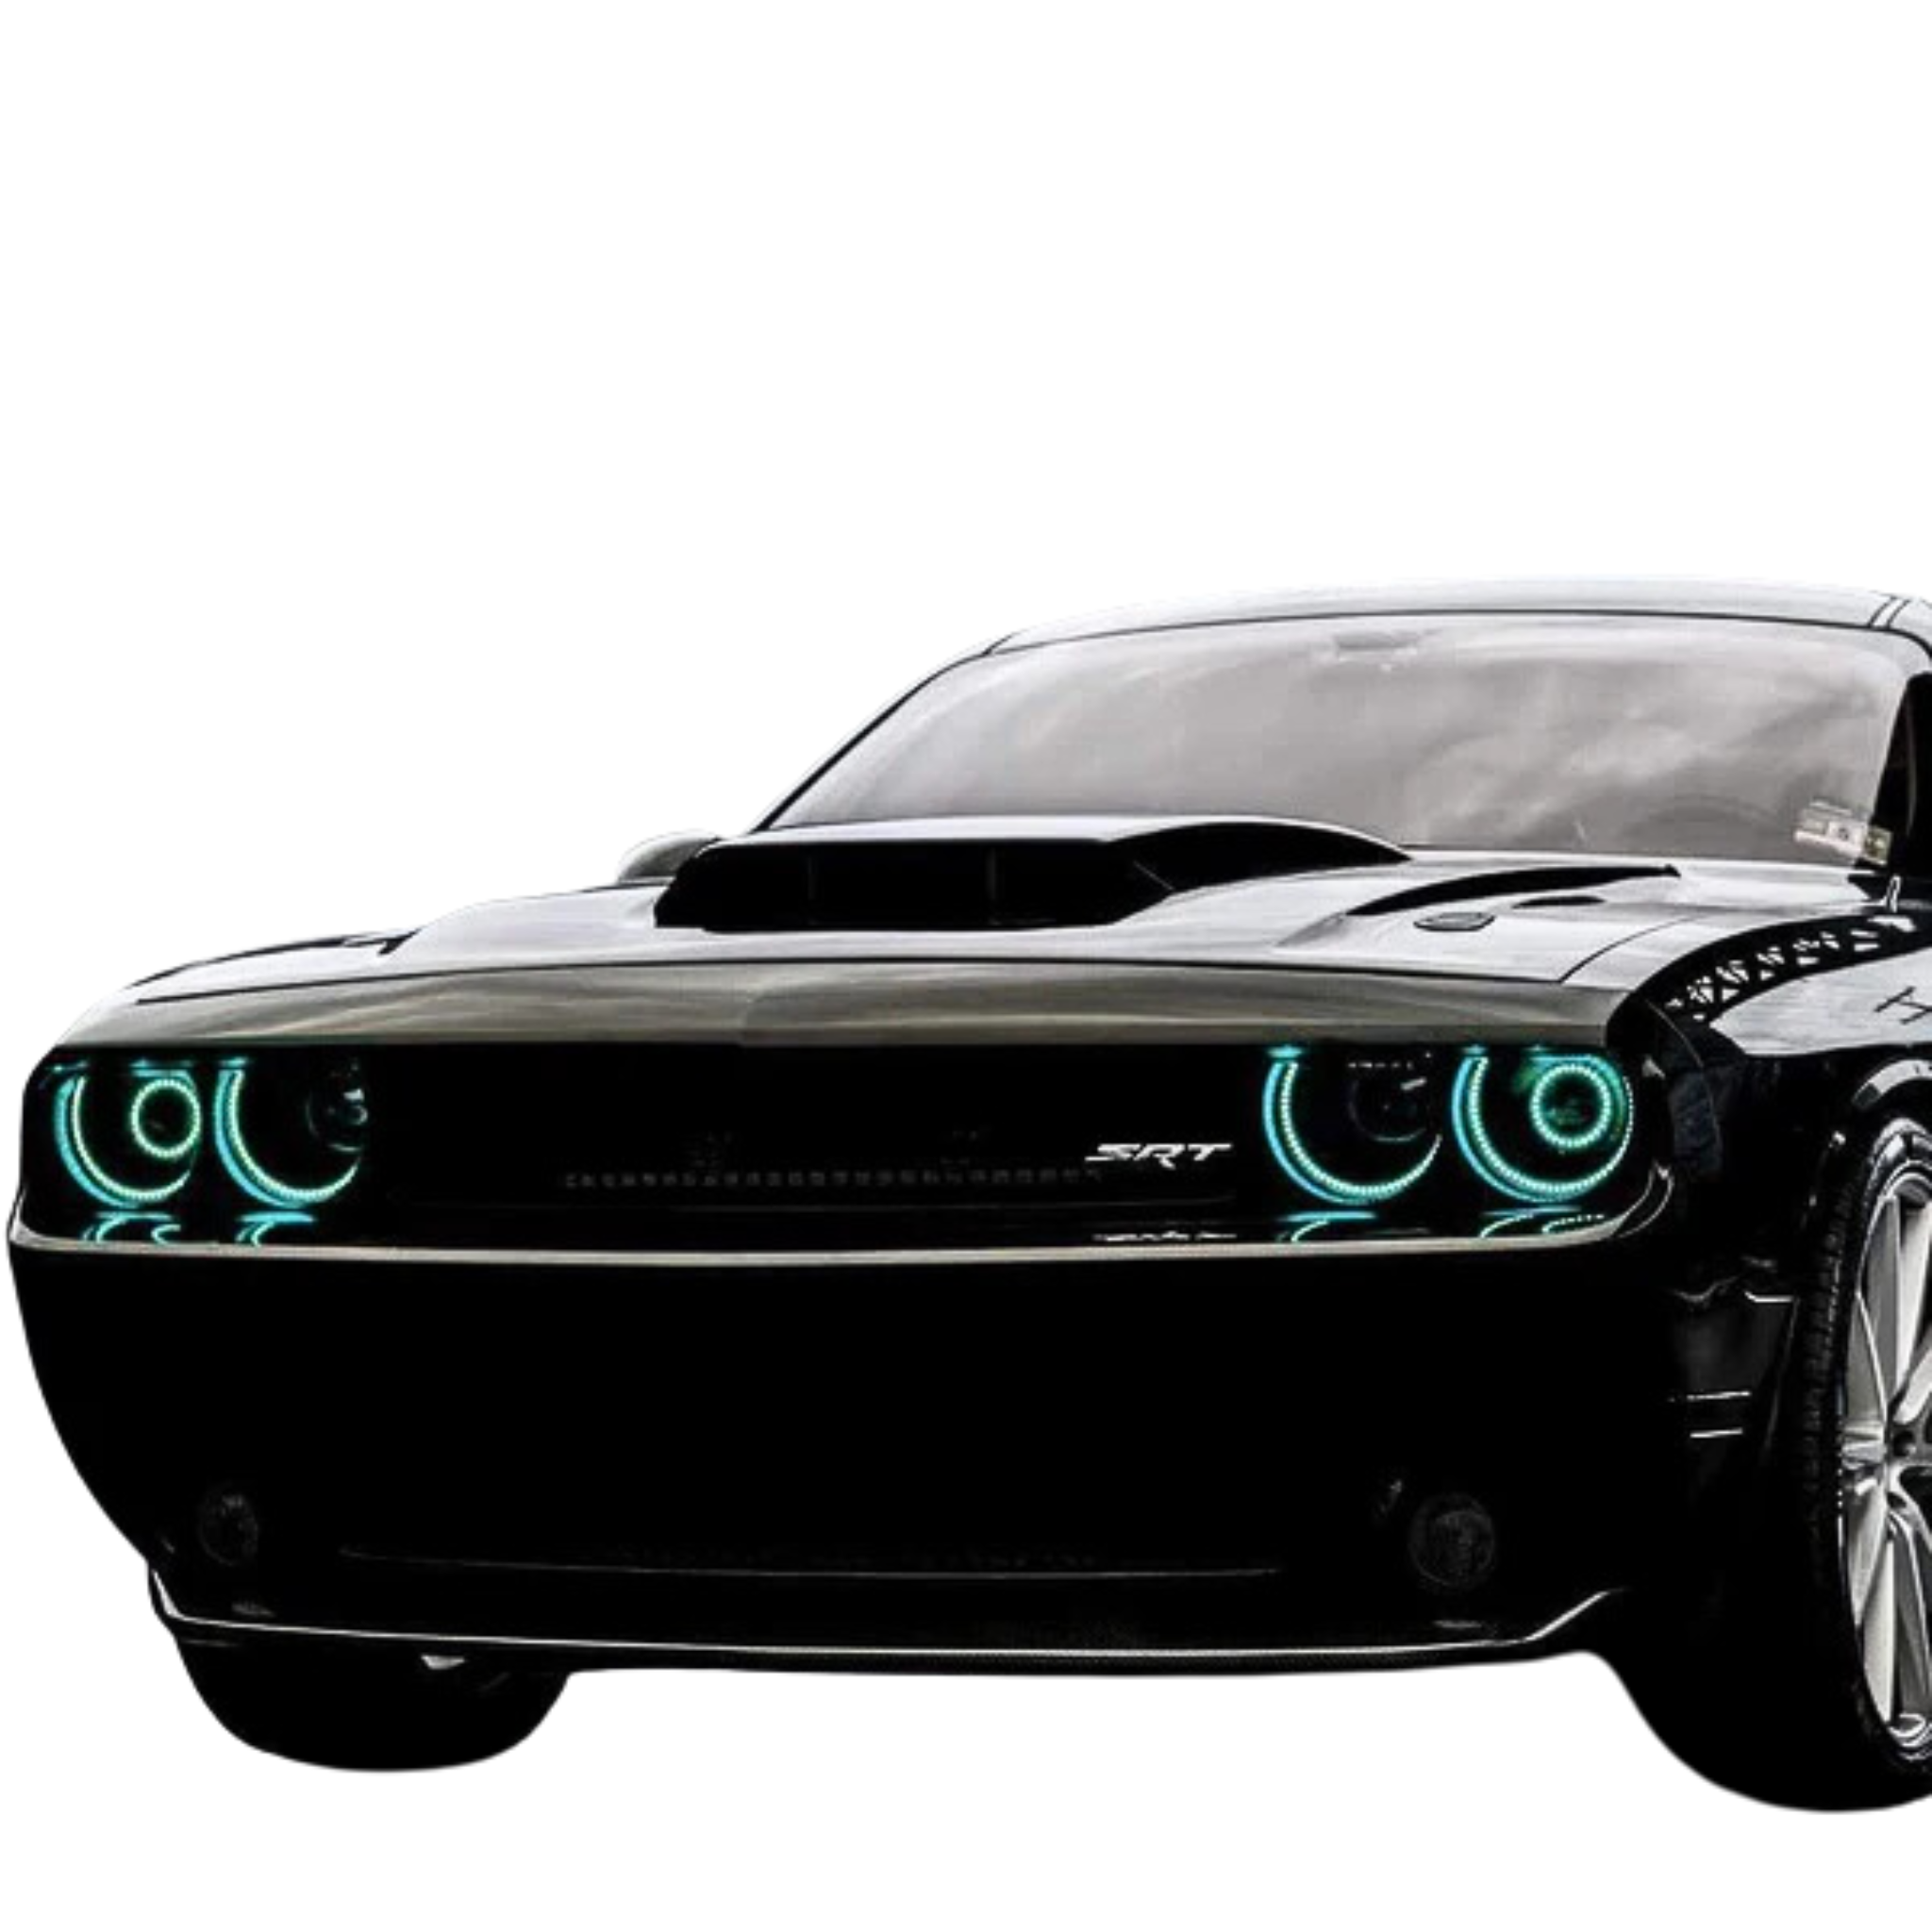 2008-2014 Dodge Challenger Waterproof Exterior Mount Multicolor Halo Kit - RGB Halo Kits Multicolor Flow Series Color Chasing RGBWA LED headlight kit Colorshift Oracle Lighting Trendz OneUpLighting Morimoto theretrofitsource AutoLEDTech Diode Dynamics